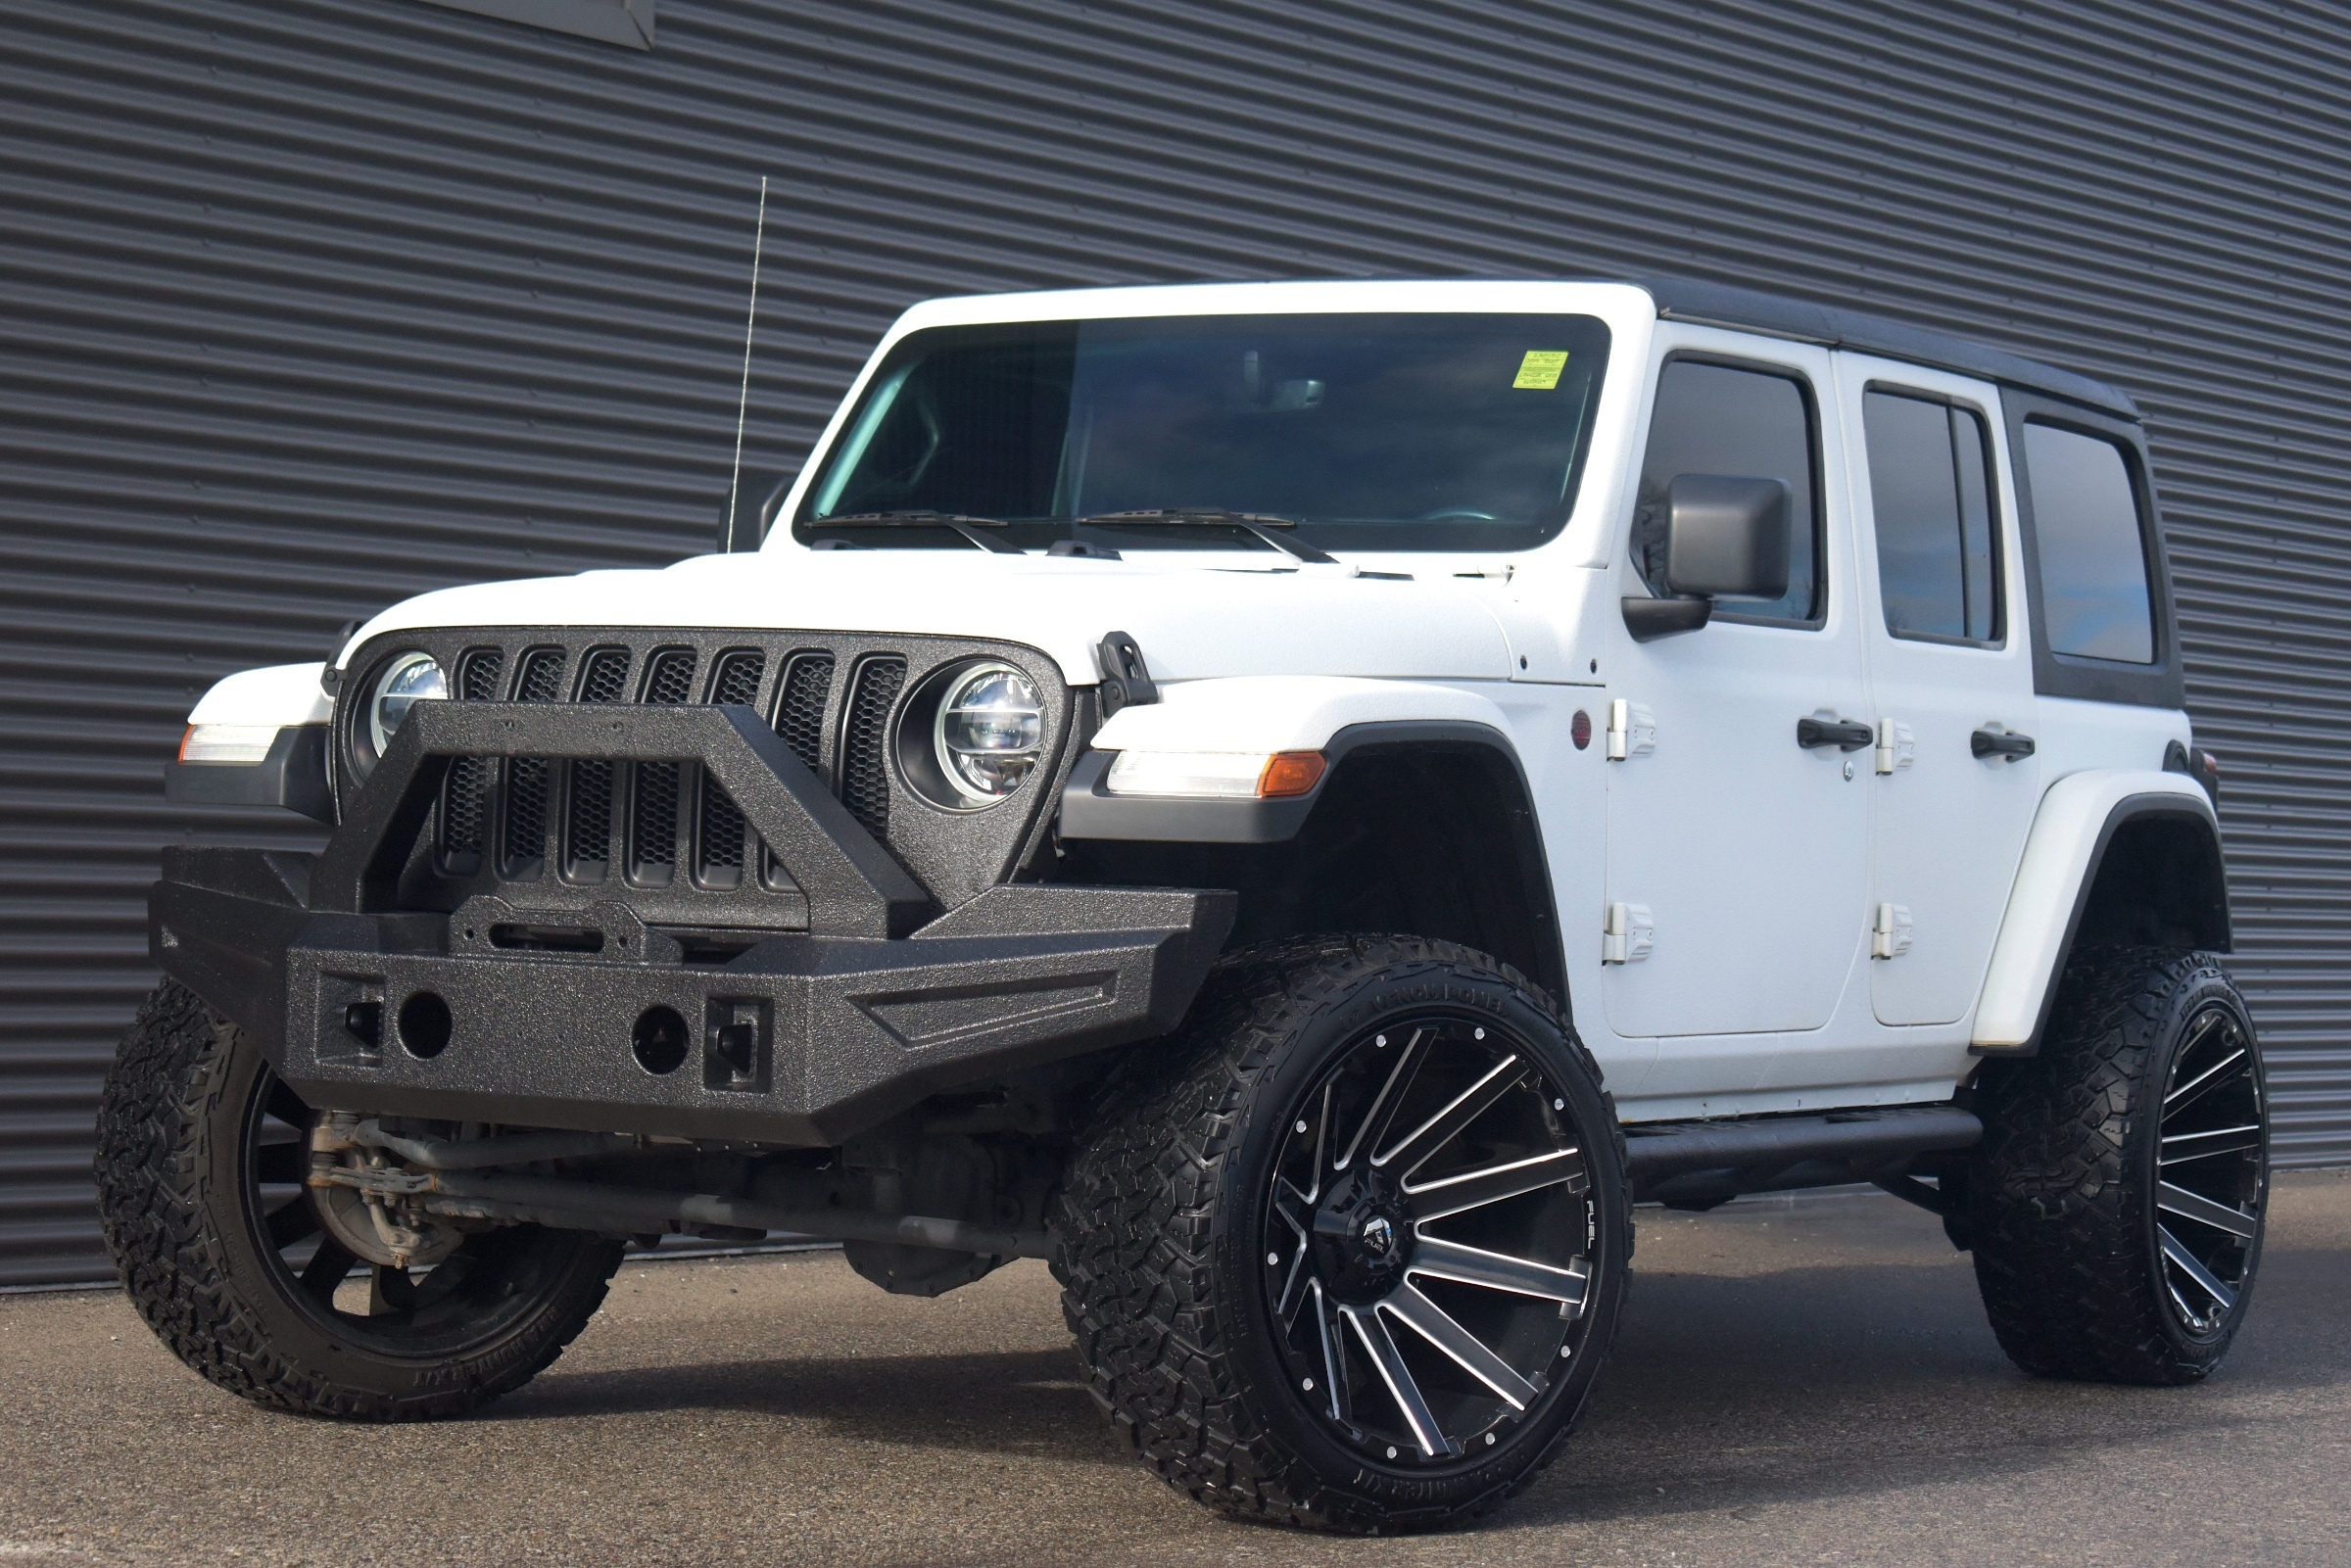 2019 Jeep WRANGLER UNLIMITED Rubicon Bought And Serviced At Oxford, Upgraded Wh